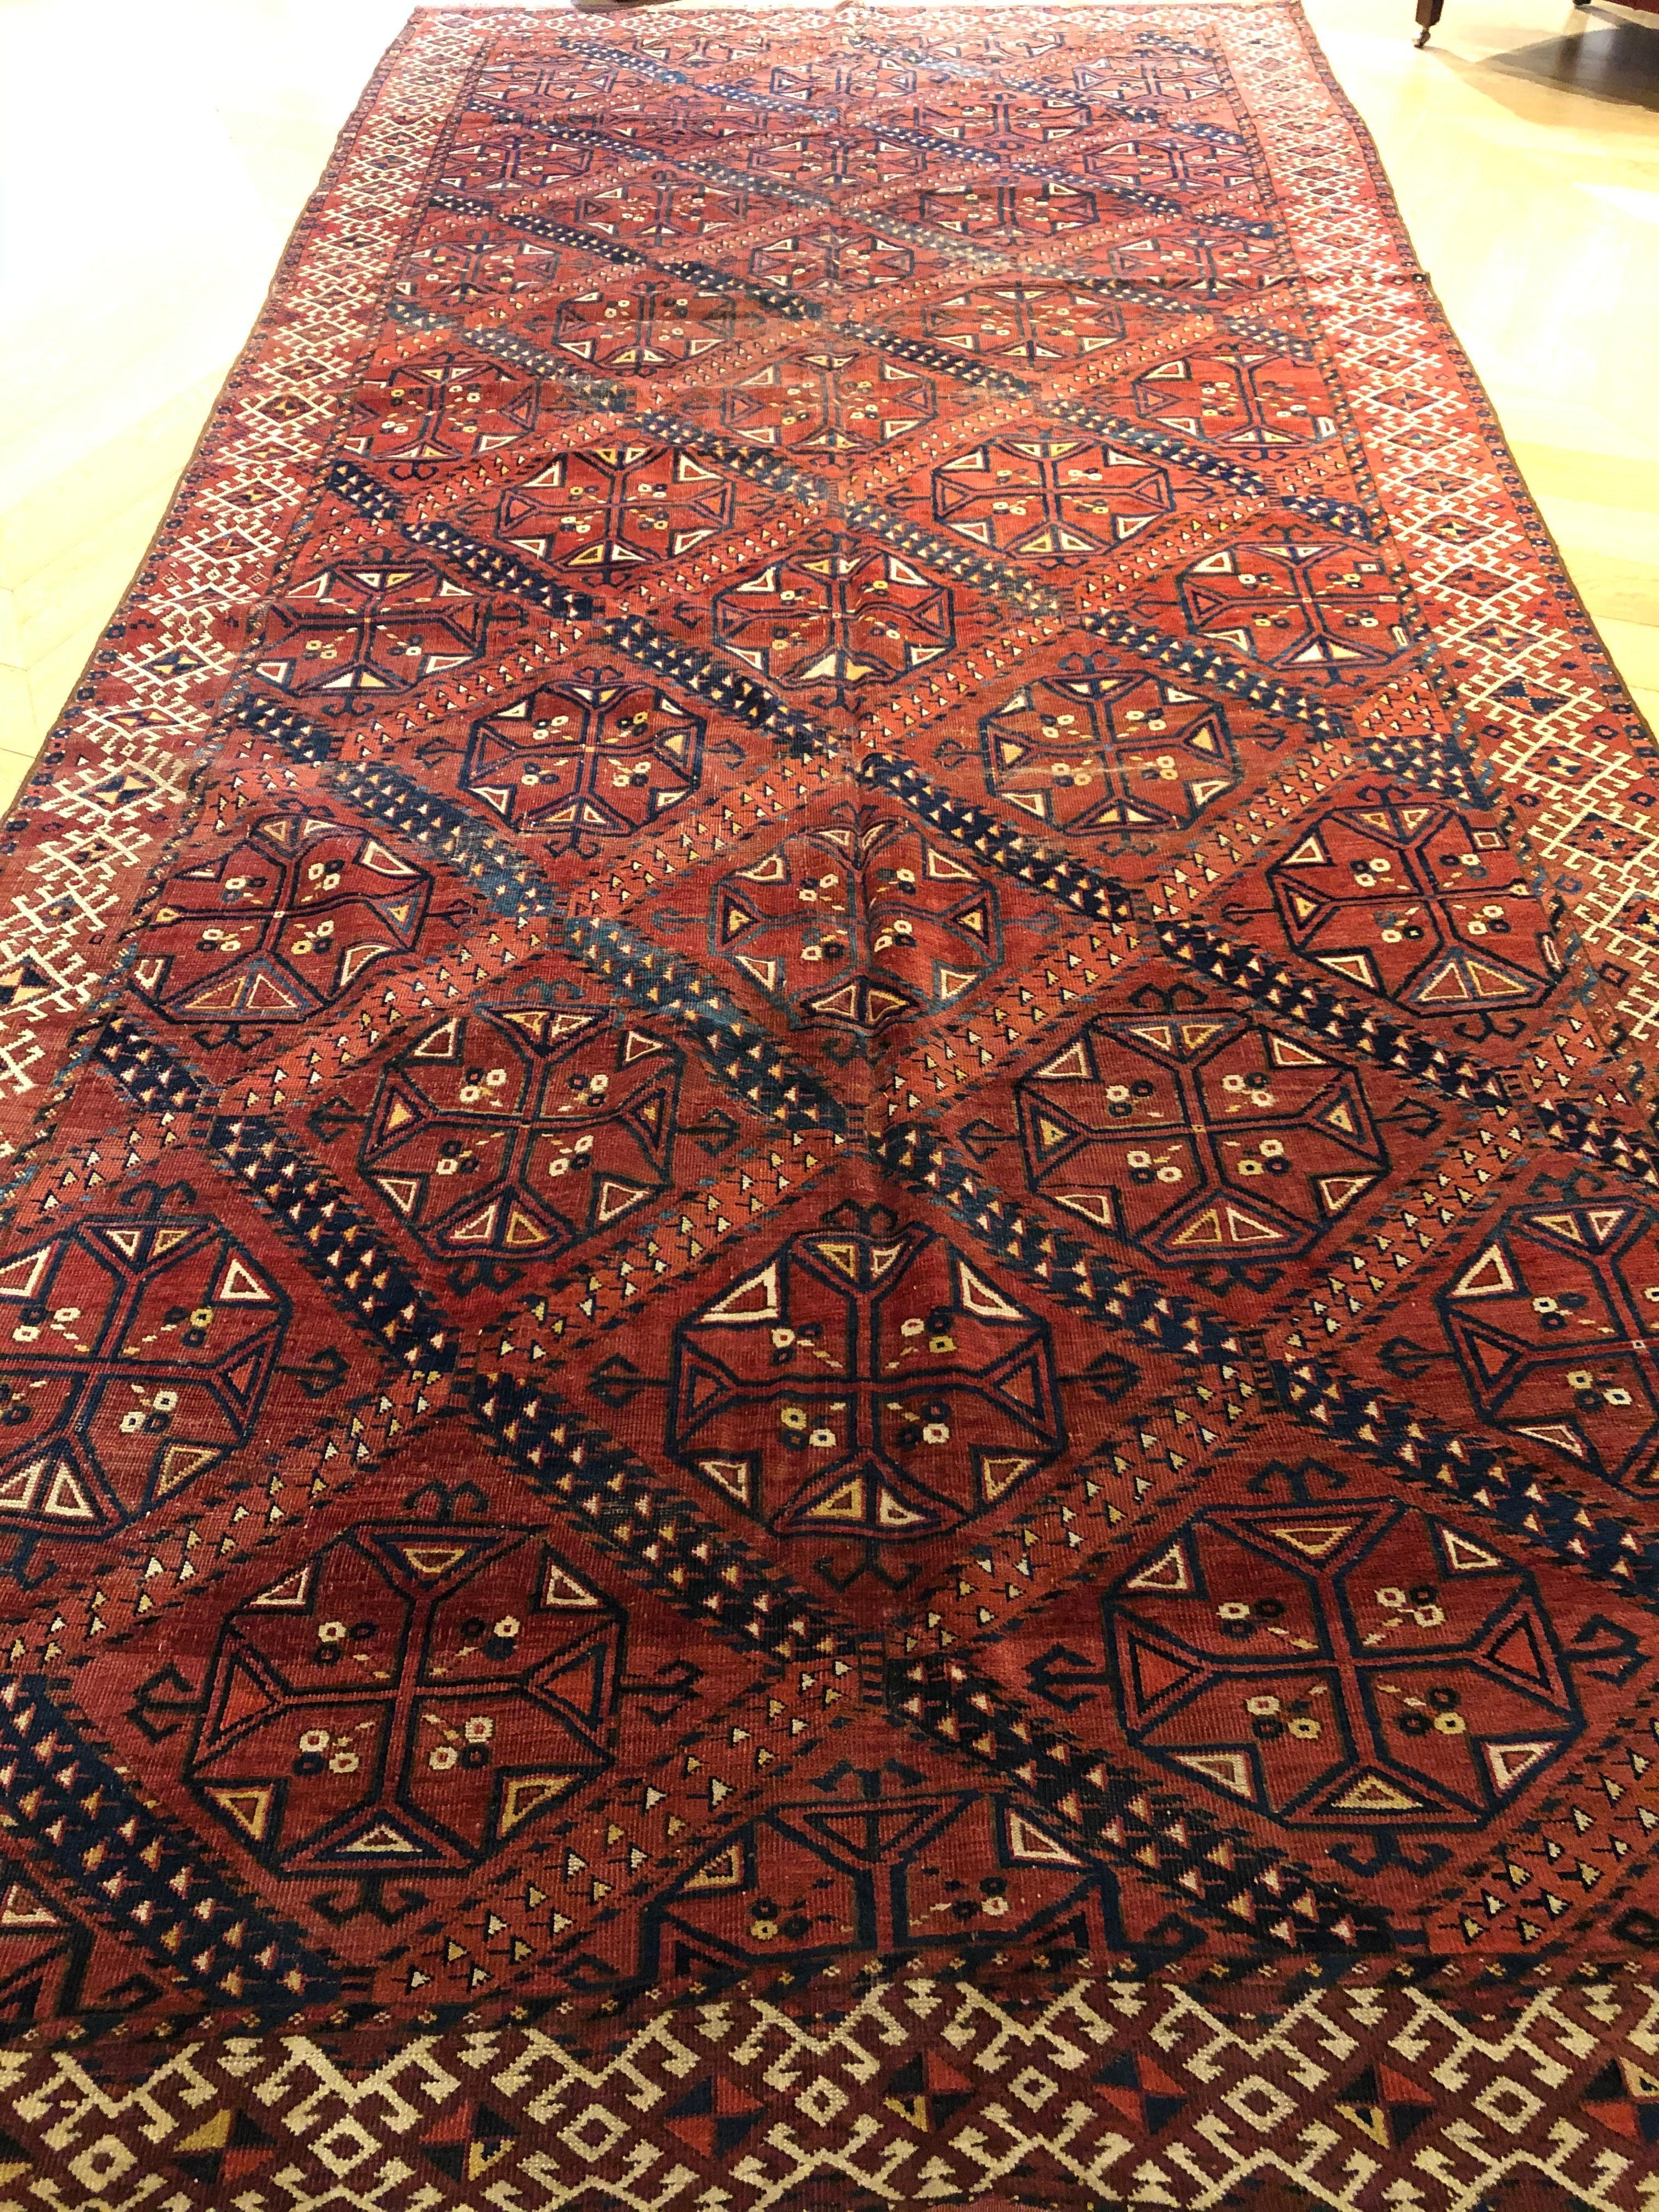 Antique Turkmen Rug Erzari sec. XIX cm. Measures: 444 x 190 € 9,000
The Ersari are a tribe of the Turkmen people of Central Asia and one of the five main tribes of Turkmenistan. The Tribu of the Eersani, the most numerous among those Turkmen, takes